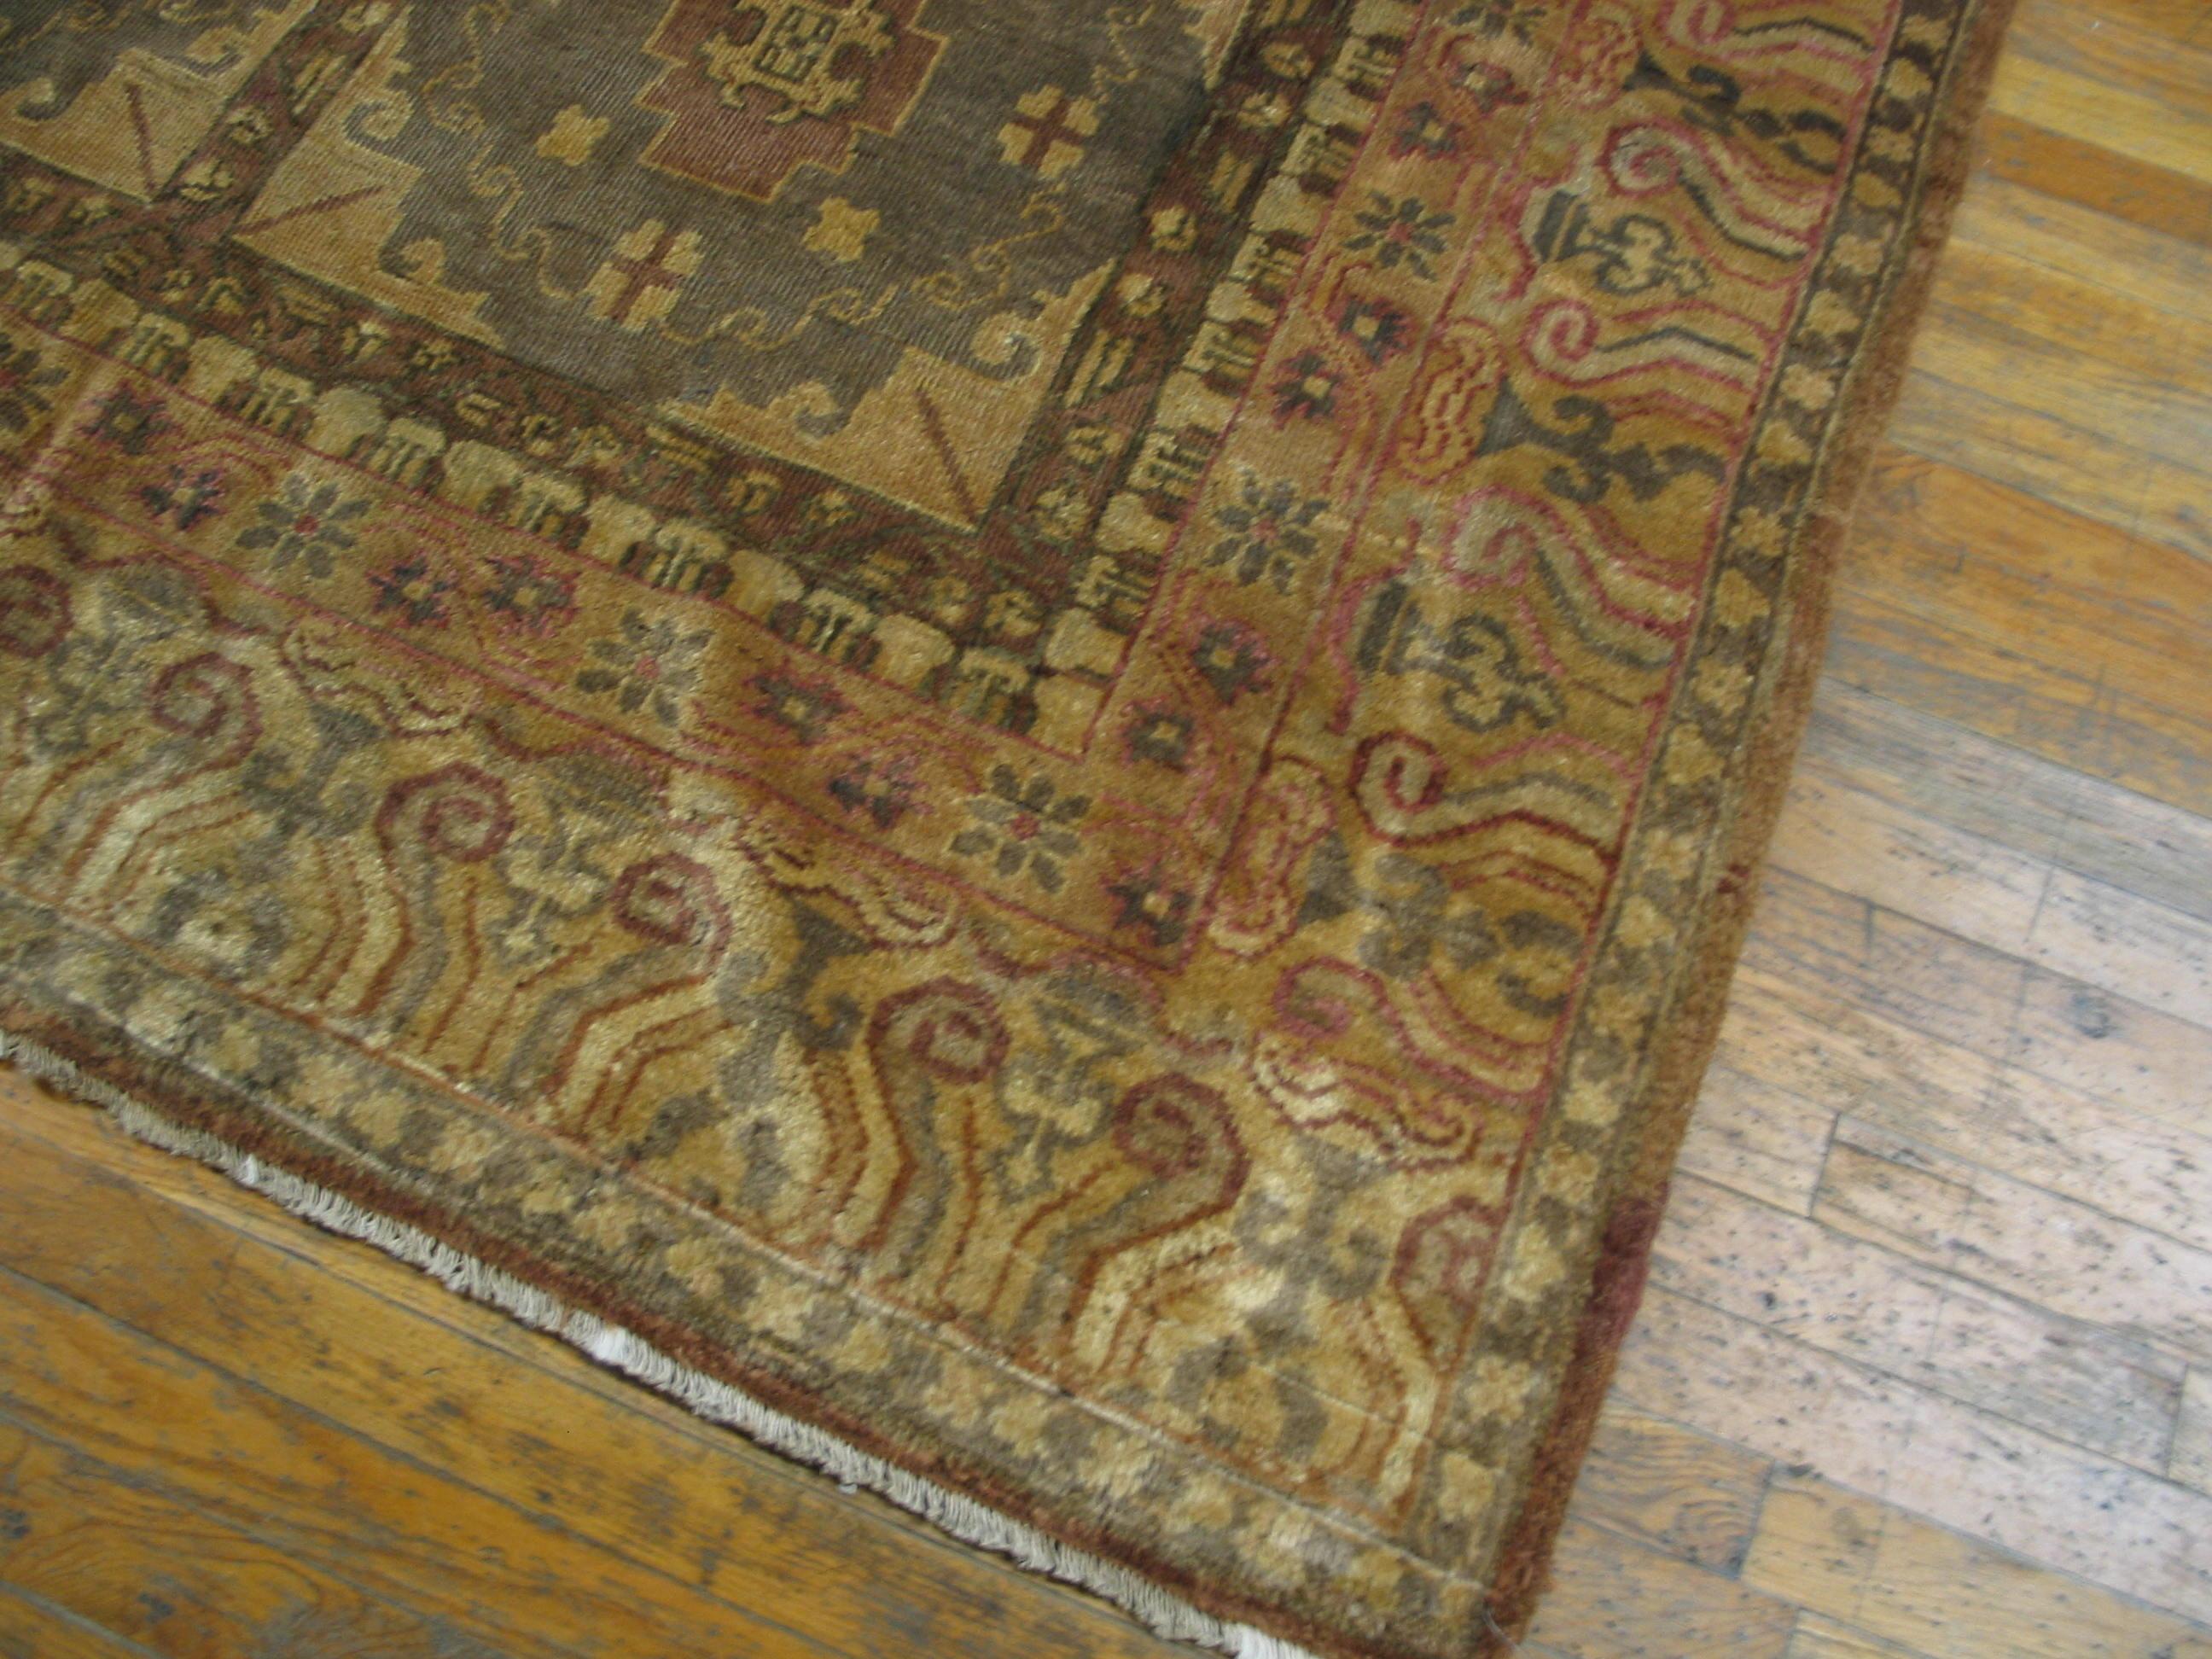 Early 20th Century Central Asian Chinese Khotan Carpet 
6'3